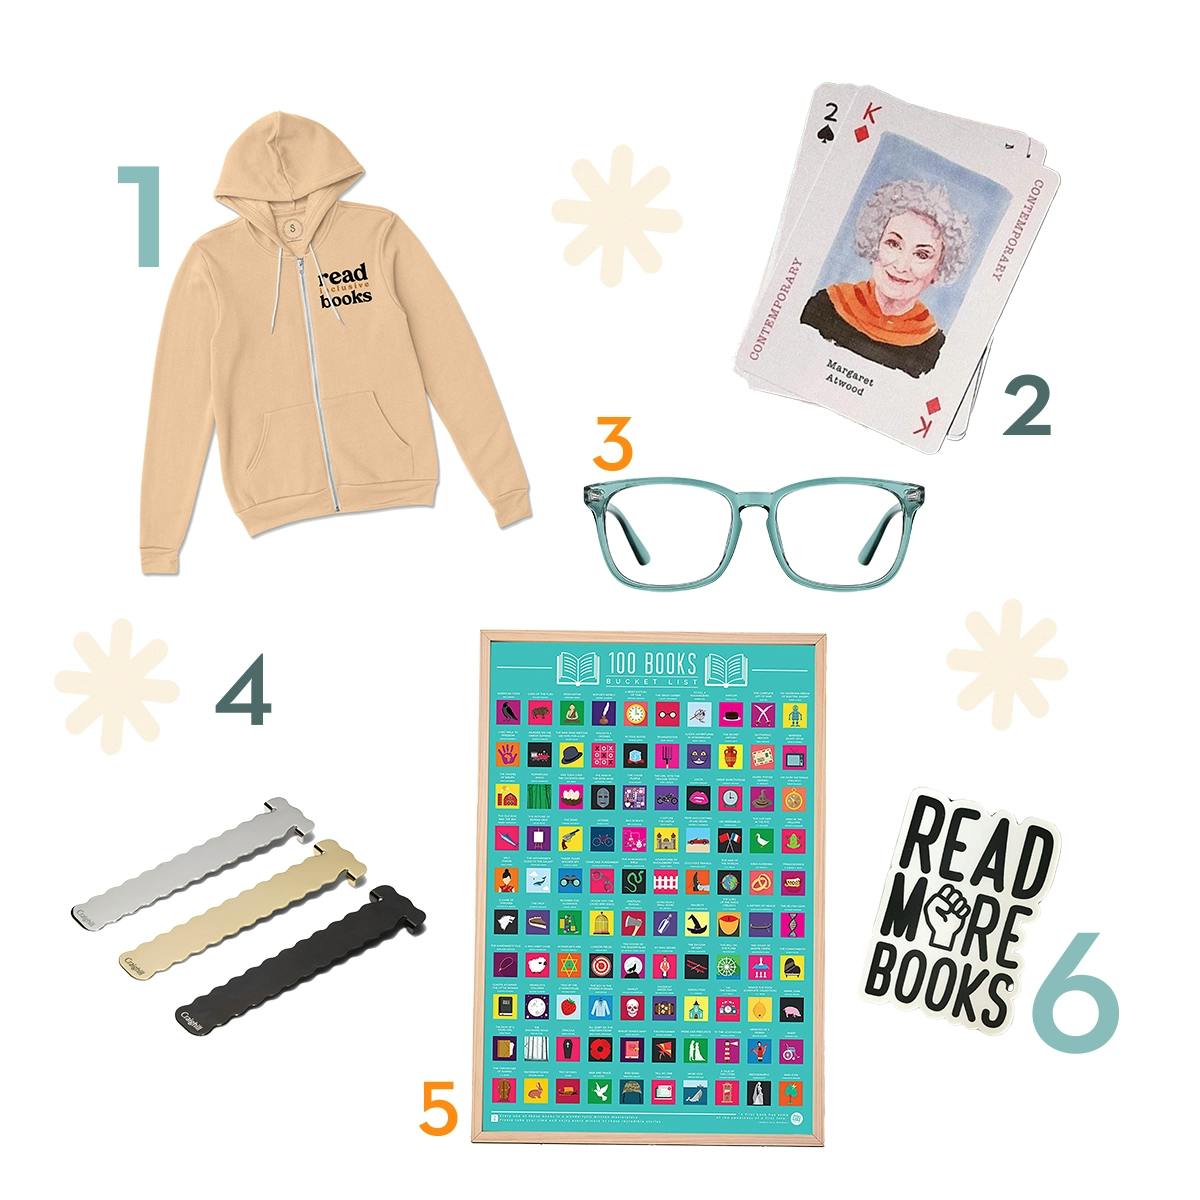 The Best Gifts for Book Readers